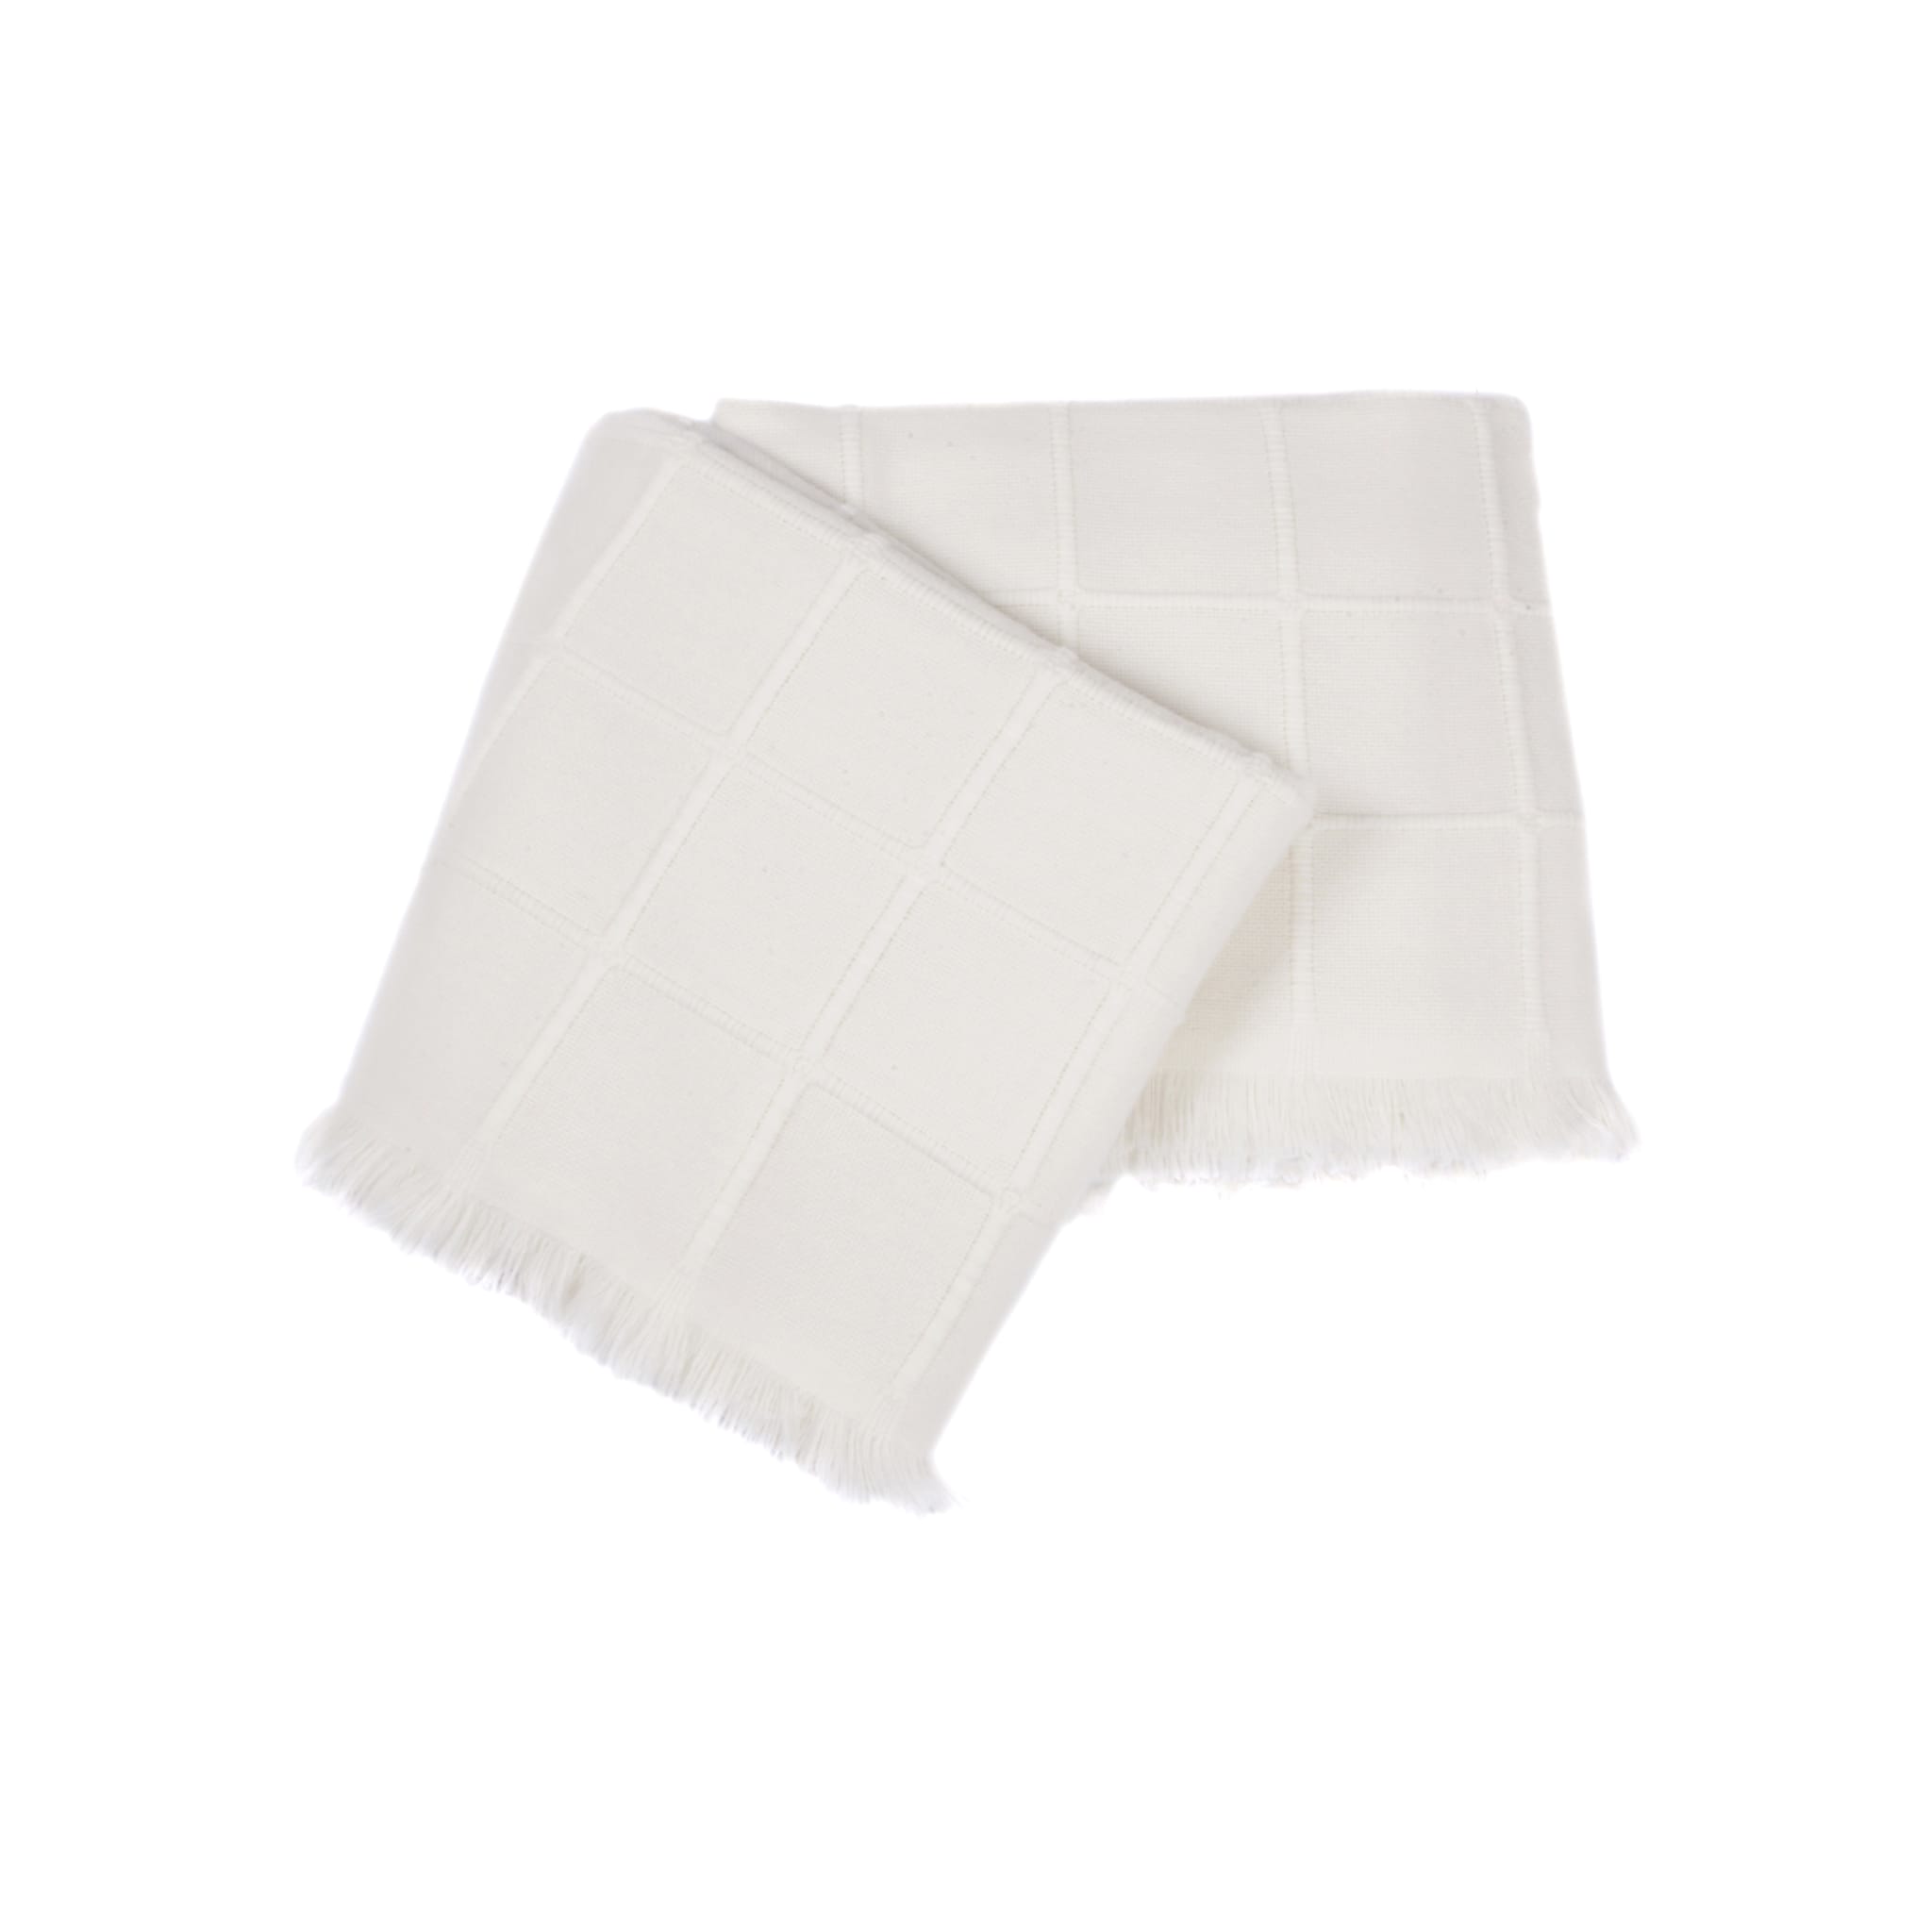 Kimberly Cream 100% Cashmere Double Plaid with side short fringes - Alternative view 1